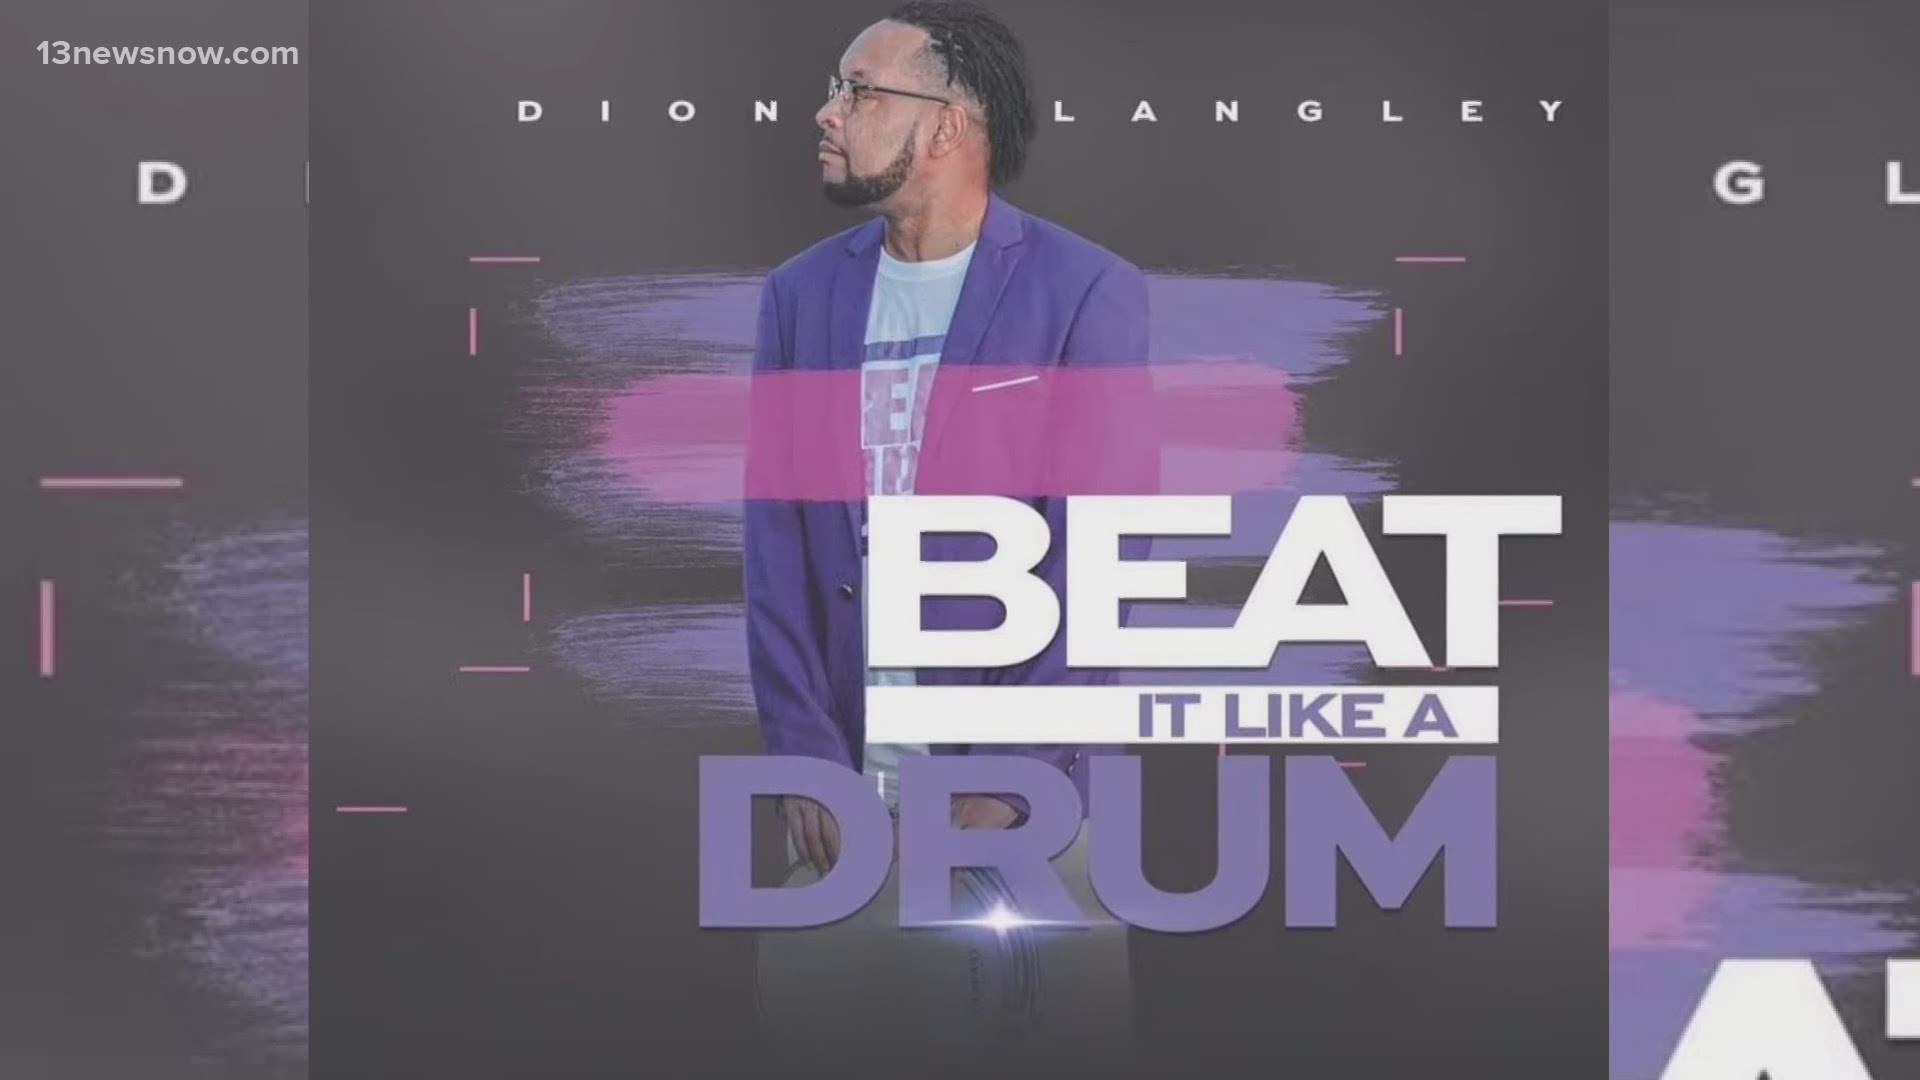 Dion Langley's song, "Beat It Like A Drum", shares his battle with lupus and encourages others to never give up.